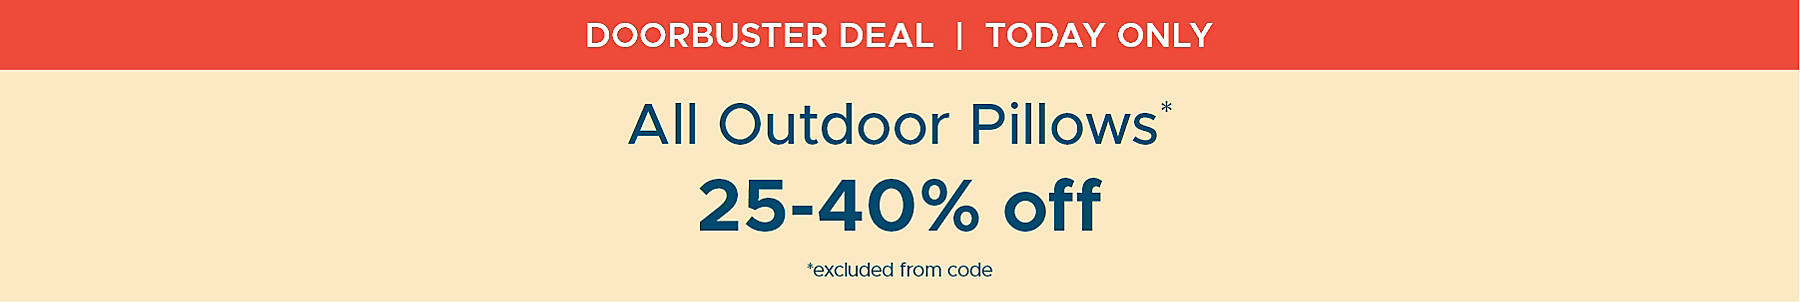 Doorbuster Deal Today Only All Outdoor Pillows* 25-40% off *excluded from code